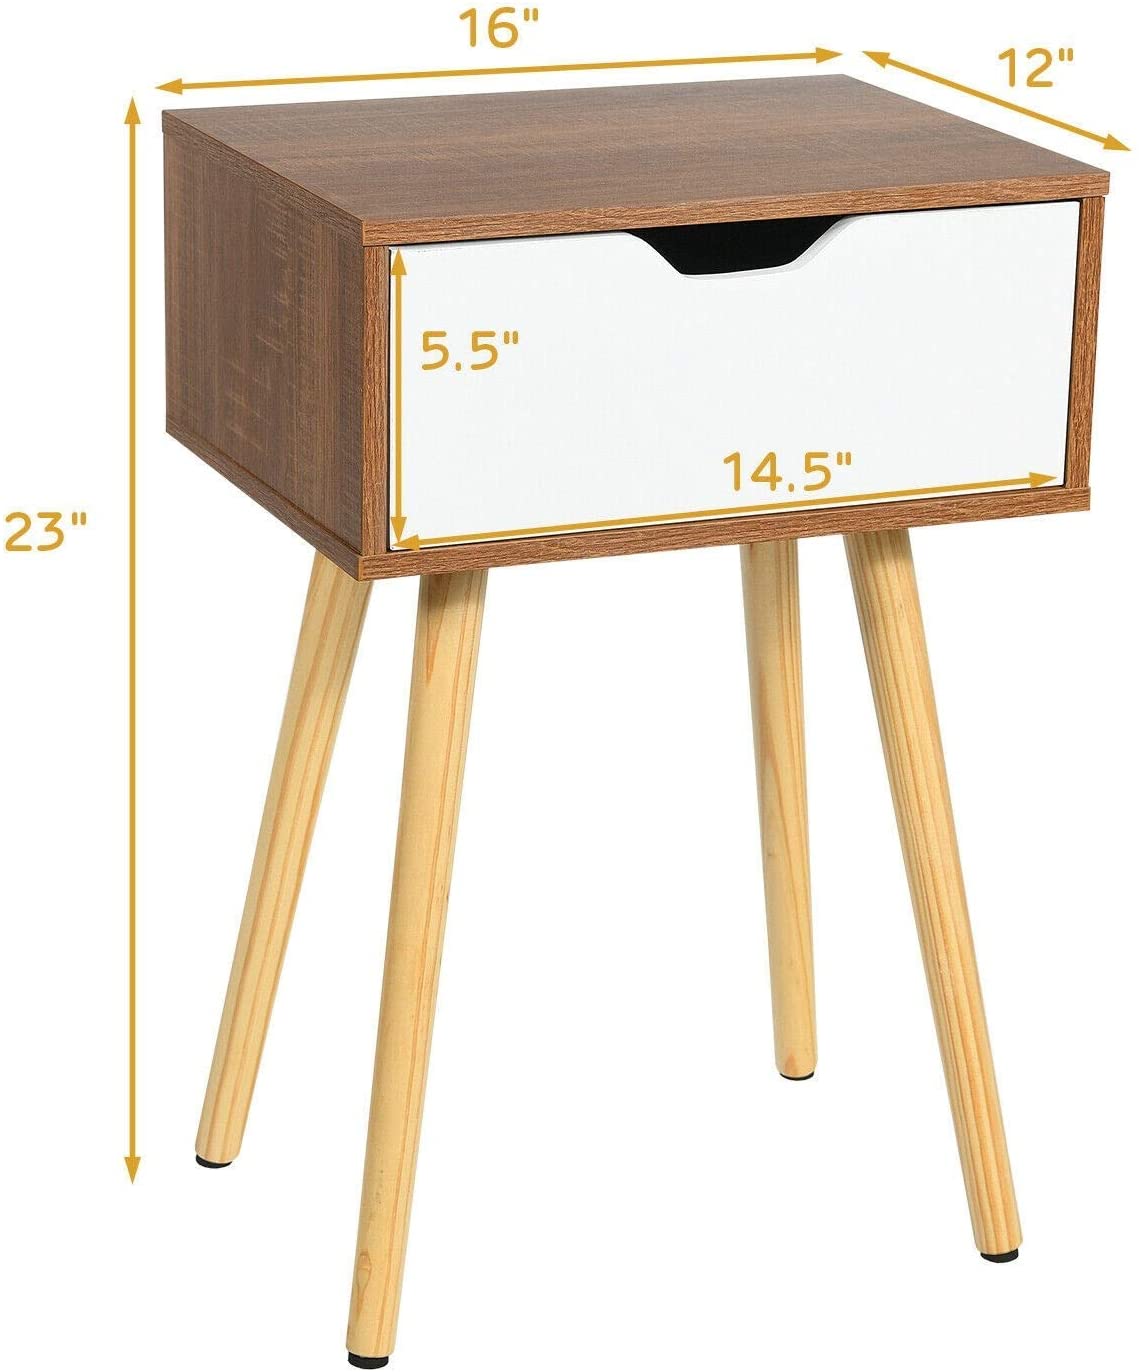 Giantex Mid-Century Nightstand, End Table with Drawer, Wood Bedside Table Side Table for Bedroom - image 3 of 7